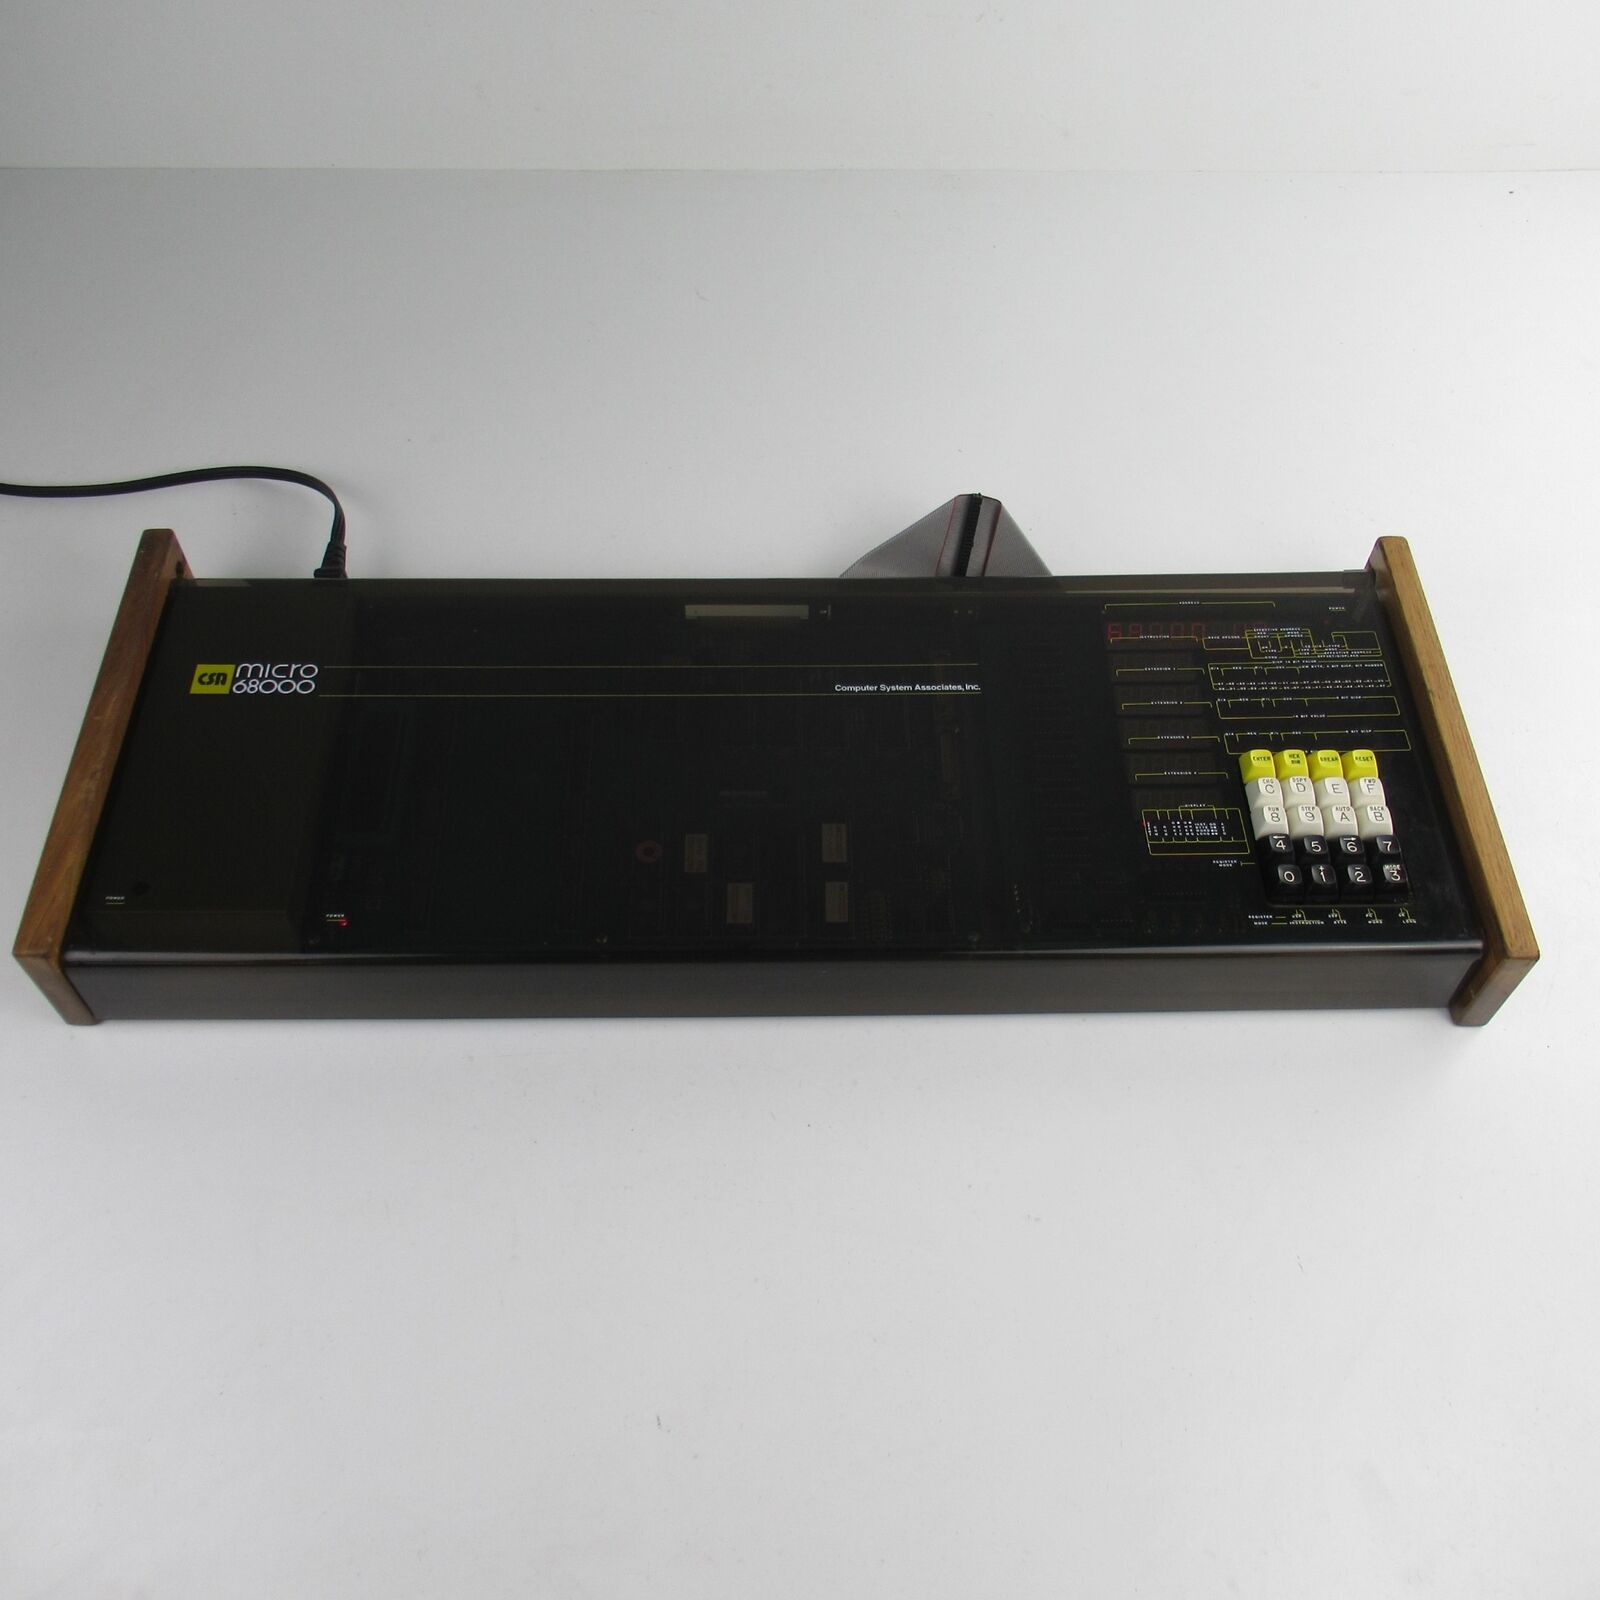 COMPUTER SYSTEM ASSOCIATES CSA MICRO 68000 BASED VINTAGE COMPUTER SYSTEM